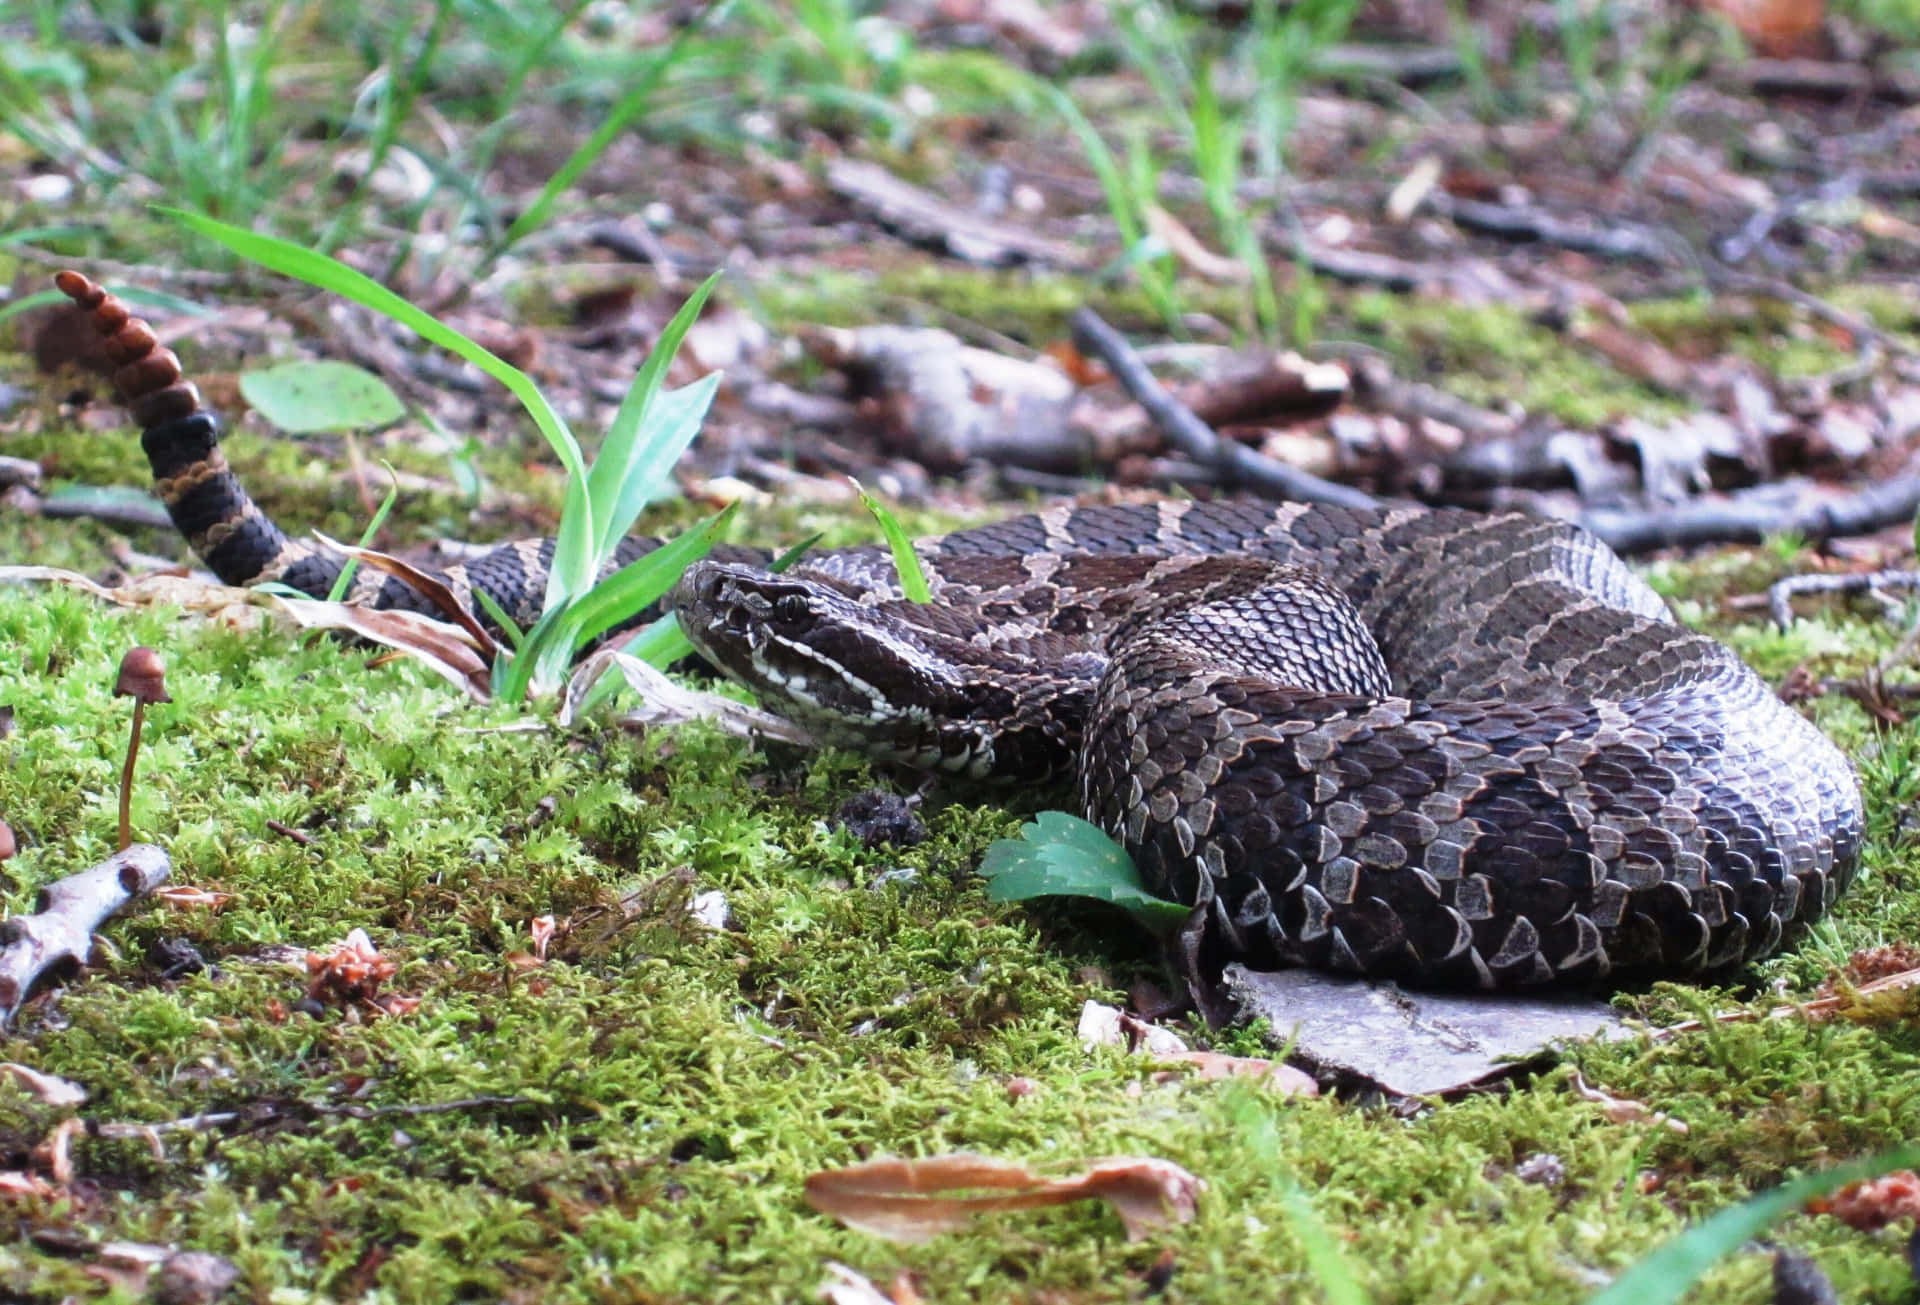 A Snake Is Laying On The Ground In The Forest